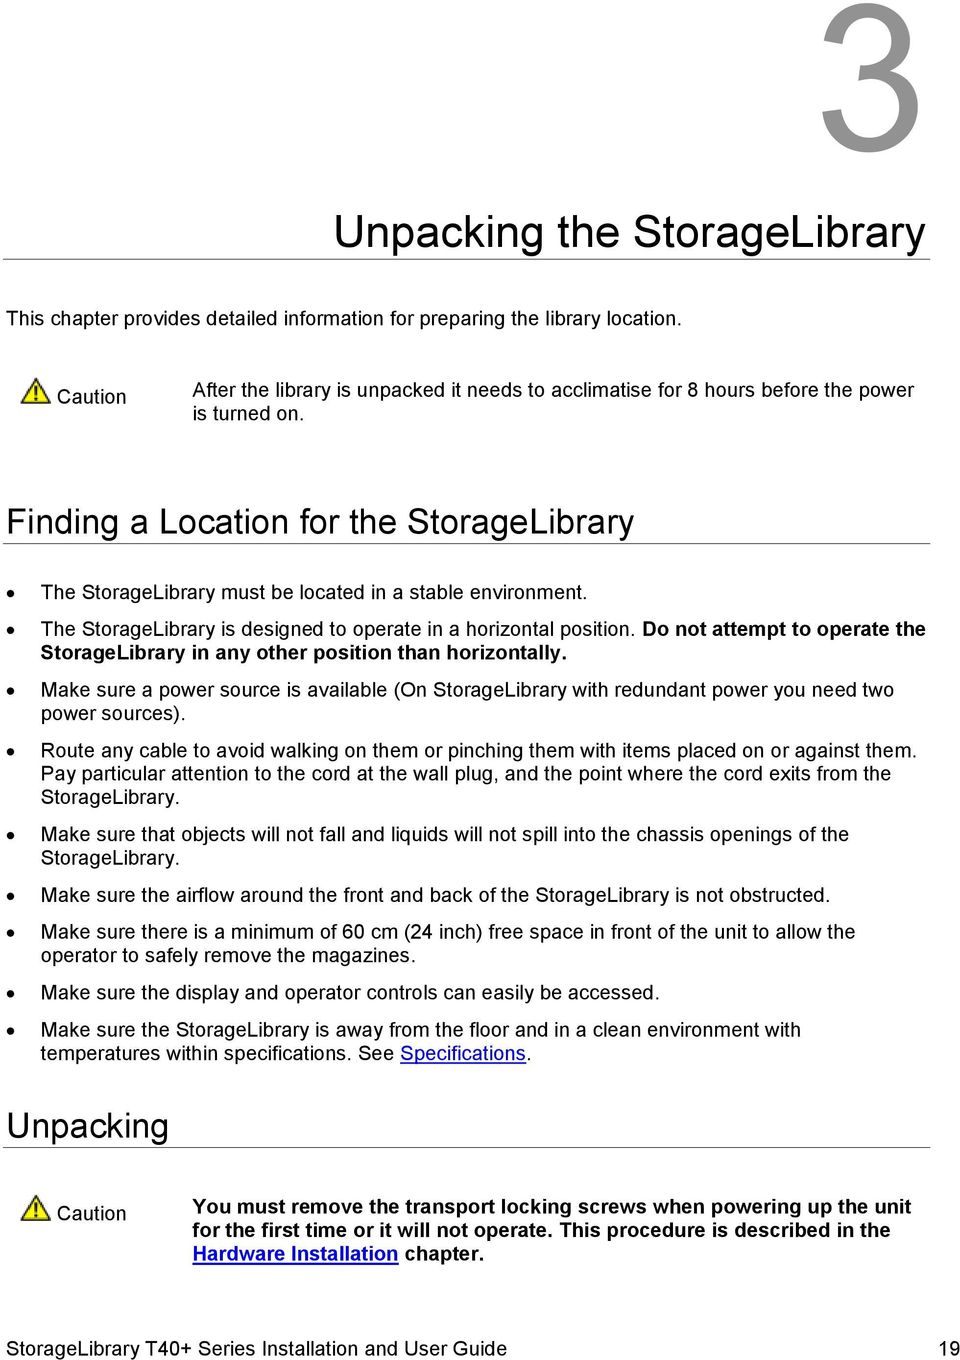 Finding a Location for the StorageLibrary The StorageLibrary must be located in a stable environment. The StorageLibrary is designed to operate in a horizontal position.